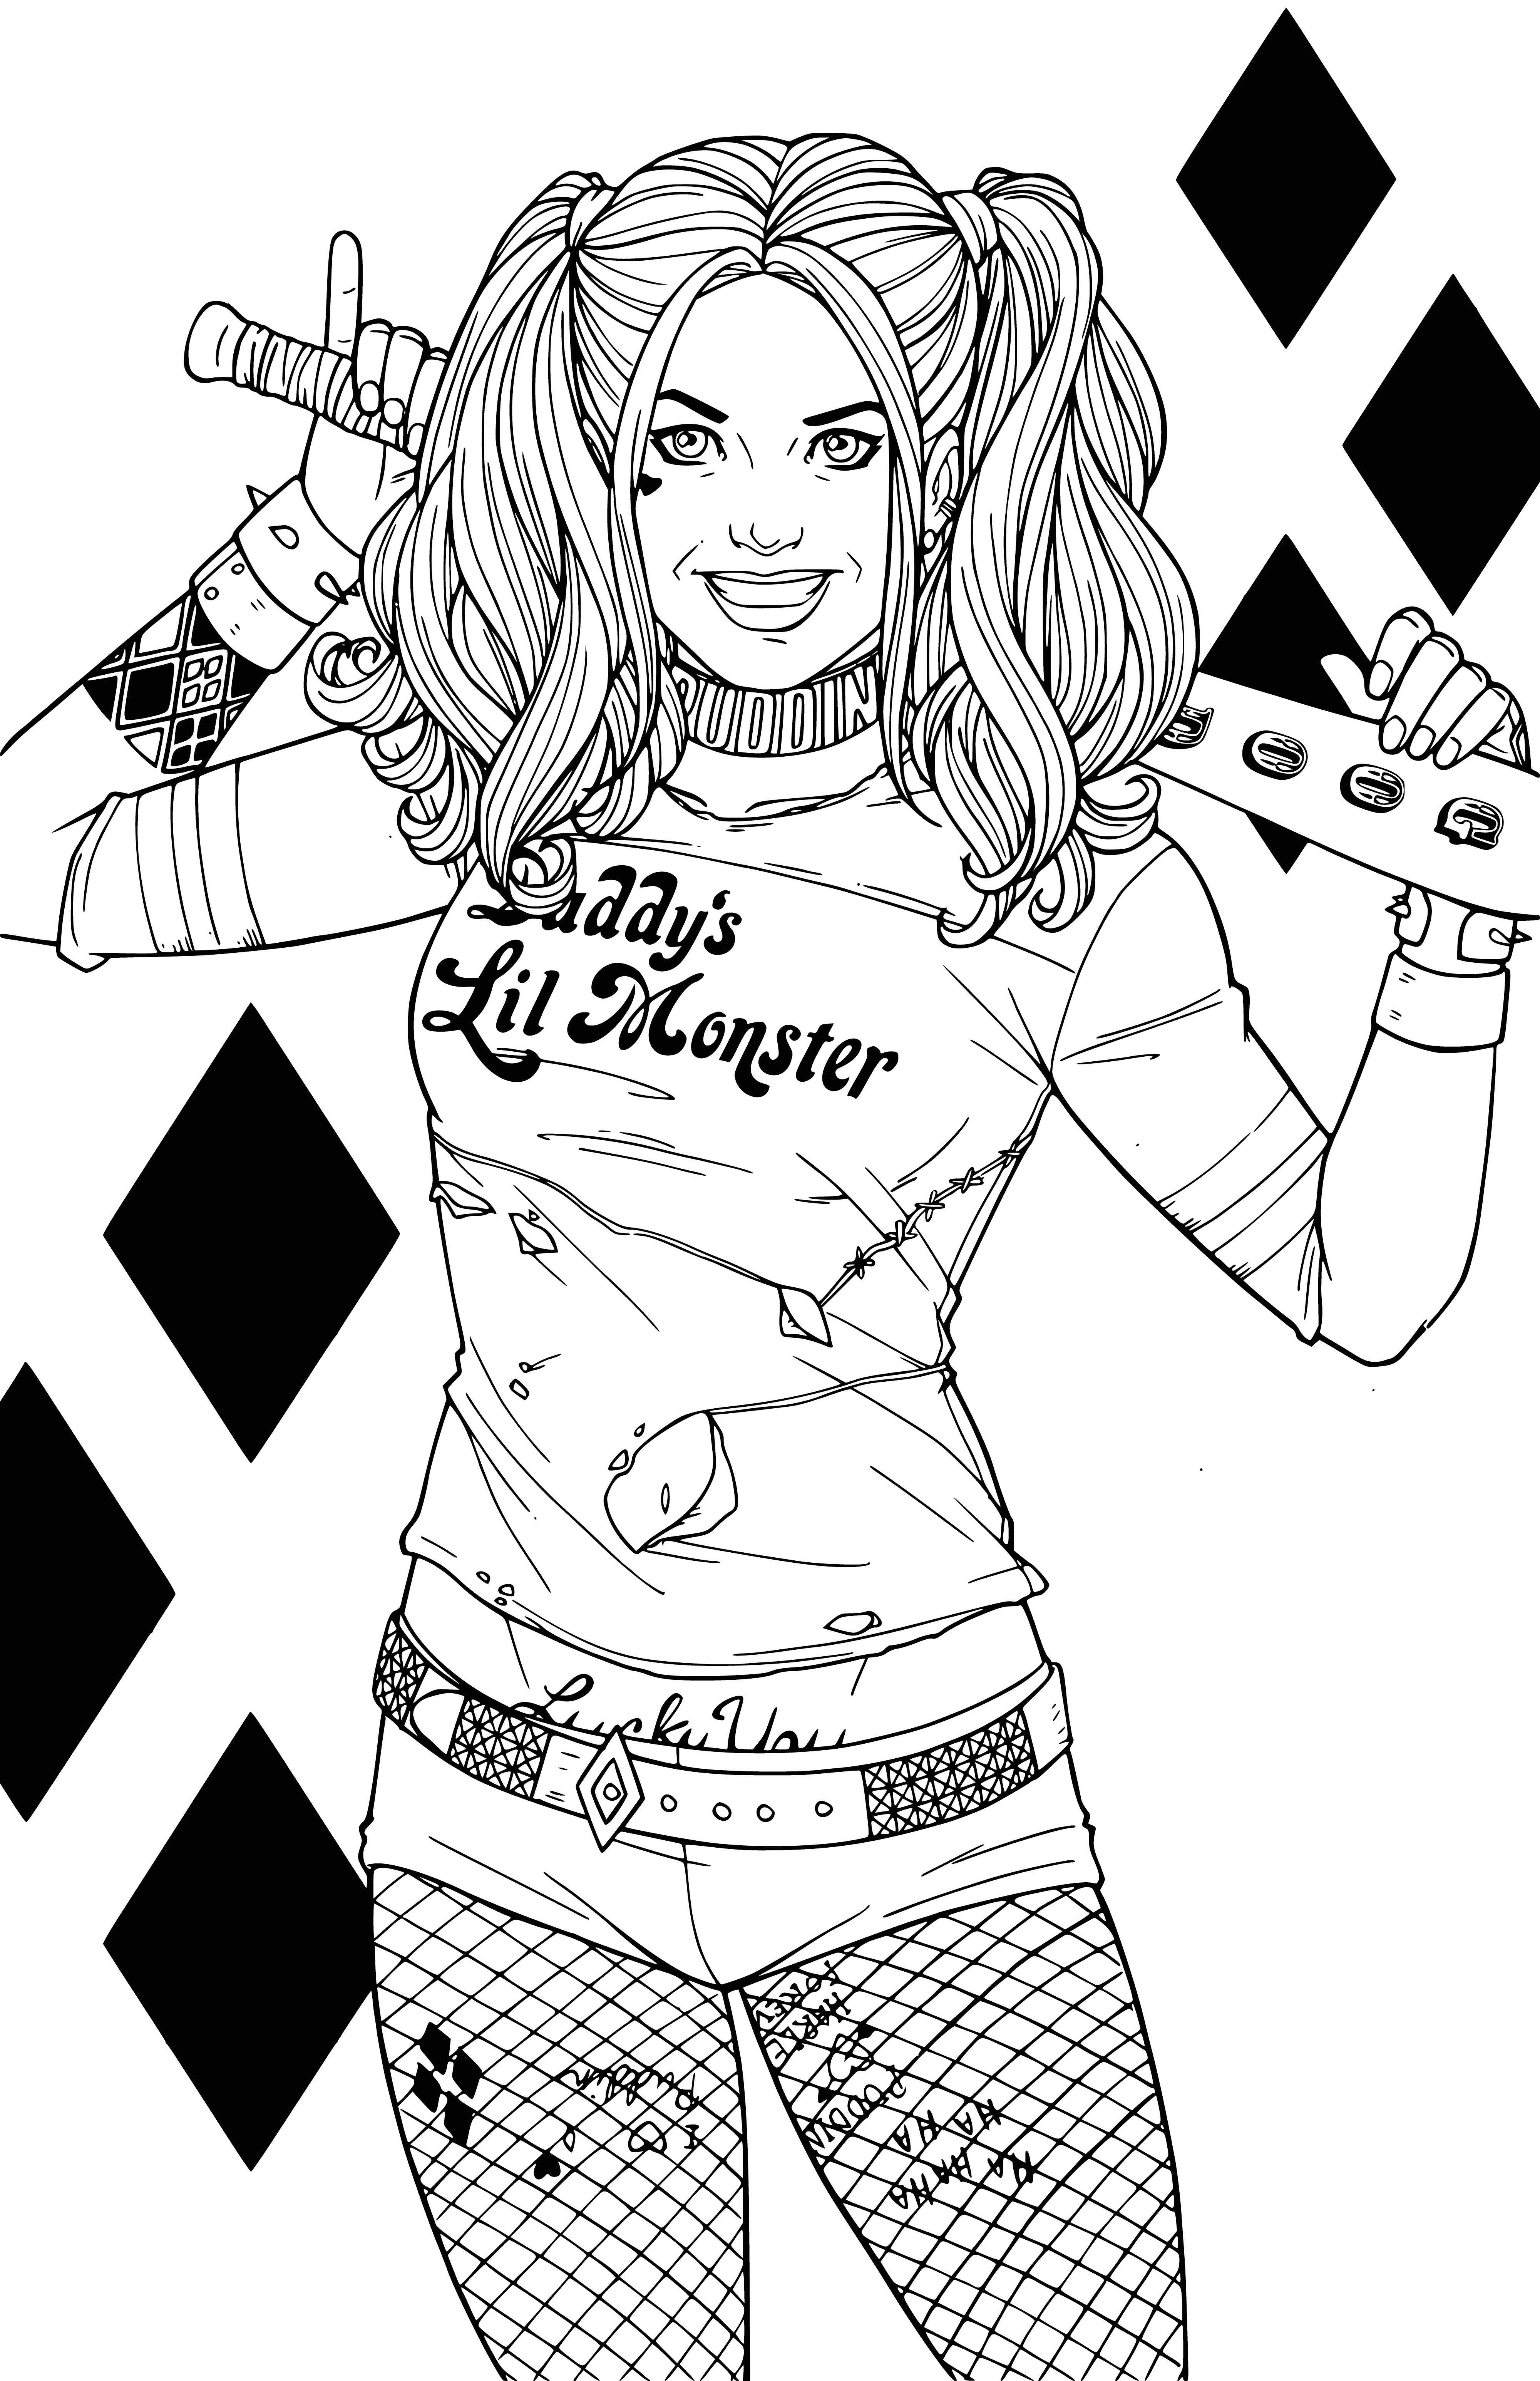 Supervillain Harley Quinn coloring page